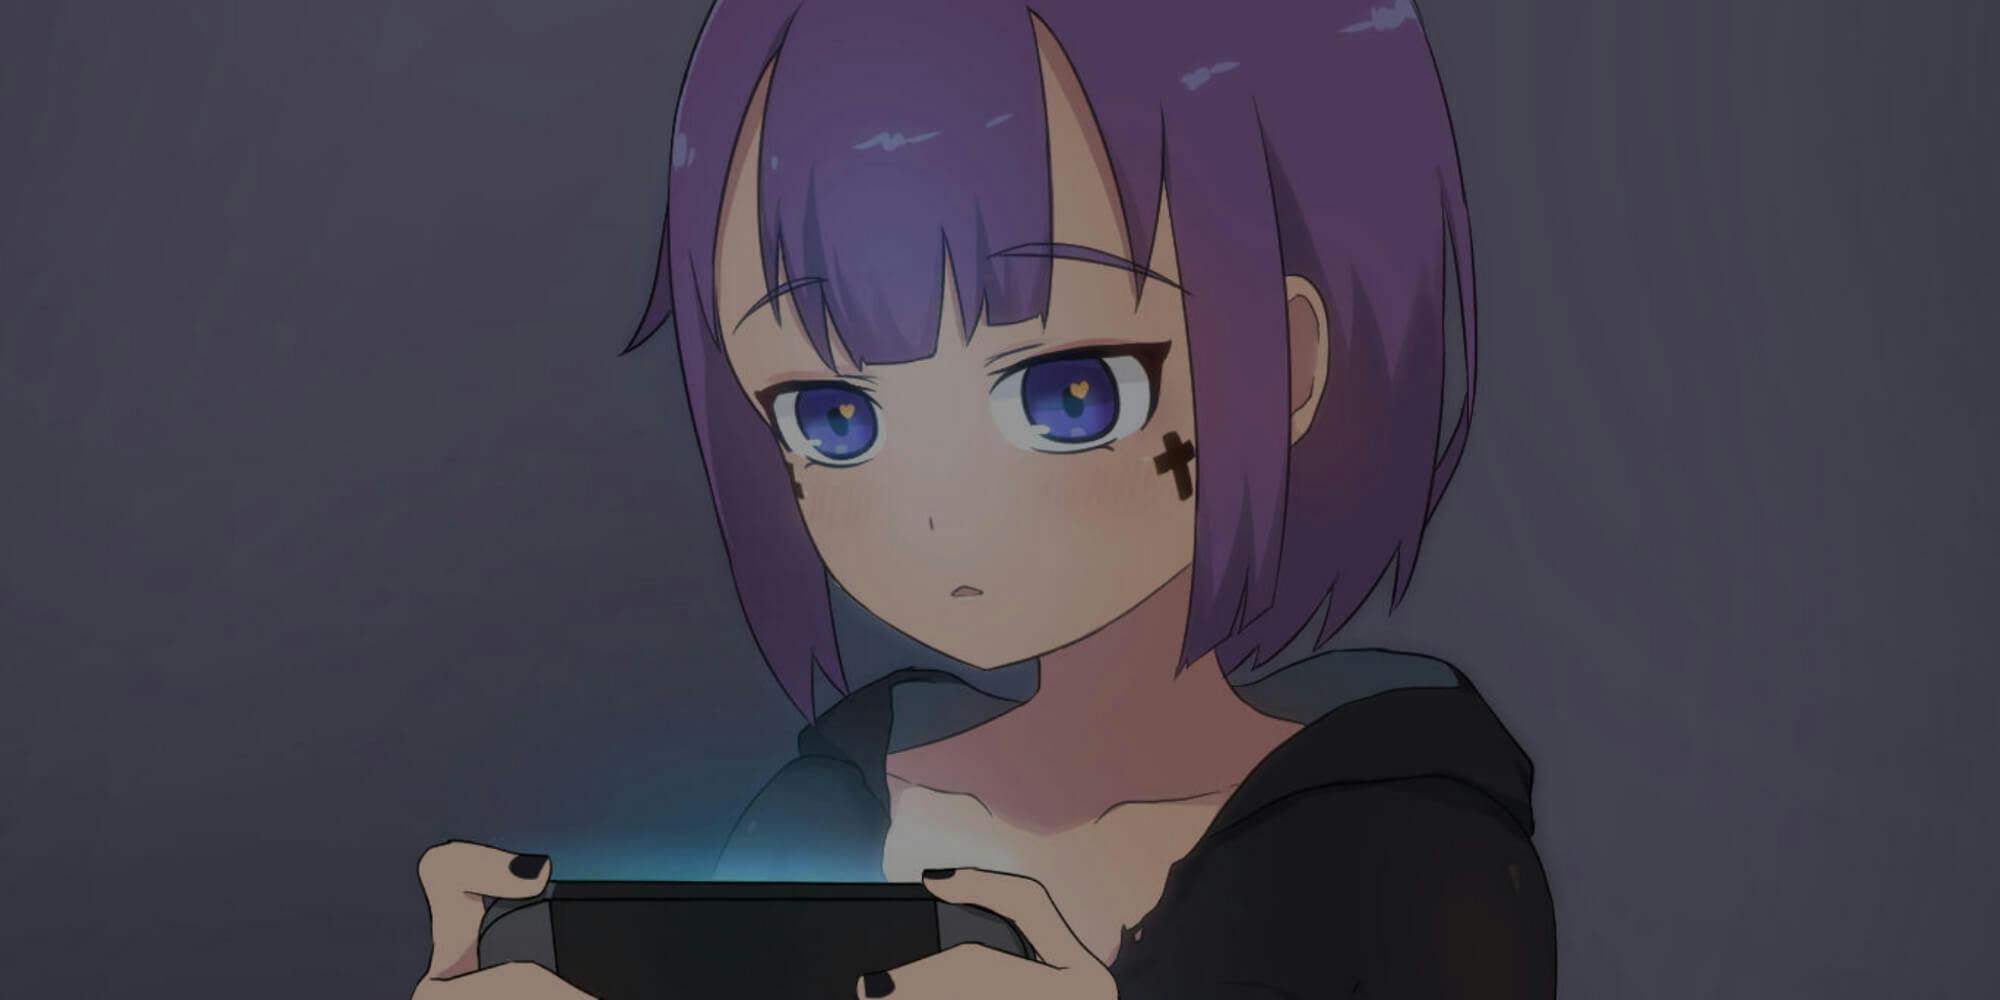 This porn game stars the Grim Reaper as an adorable anime girl